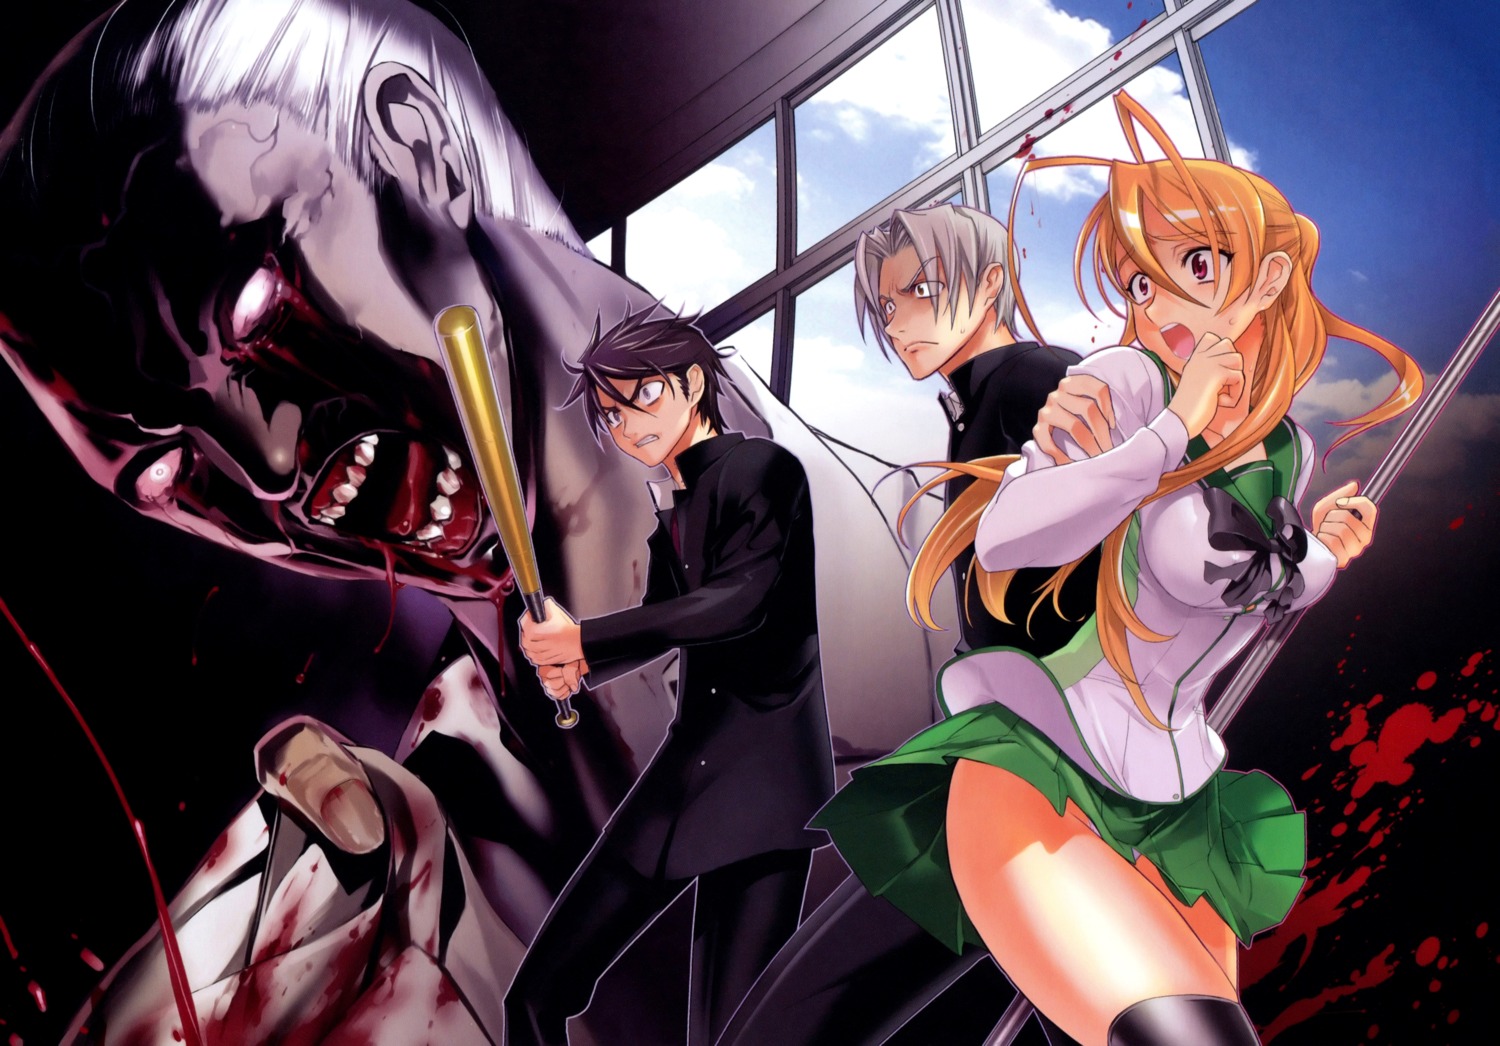 Download Anime Characters Highschool Of The Dead Wallpaper